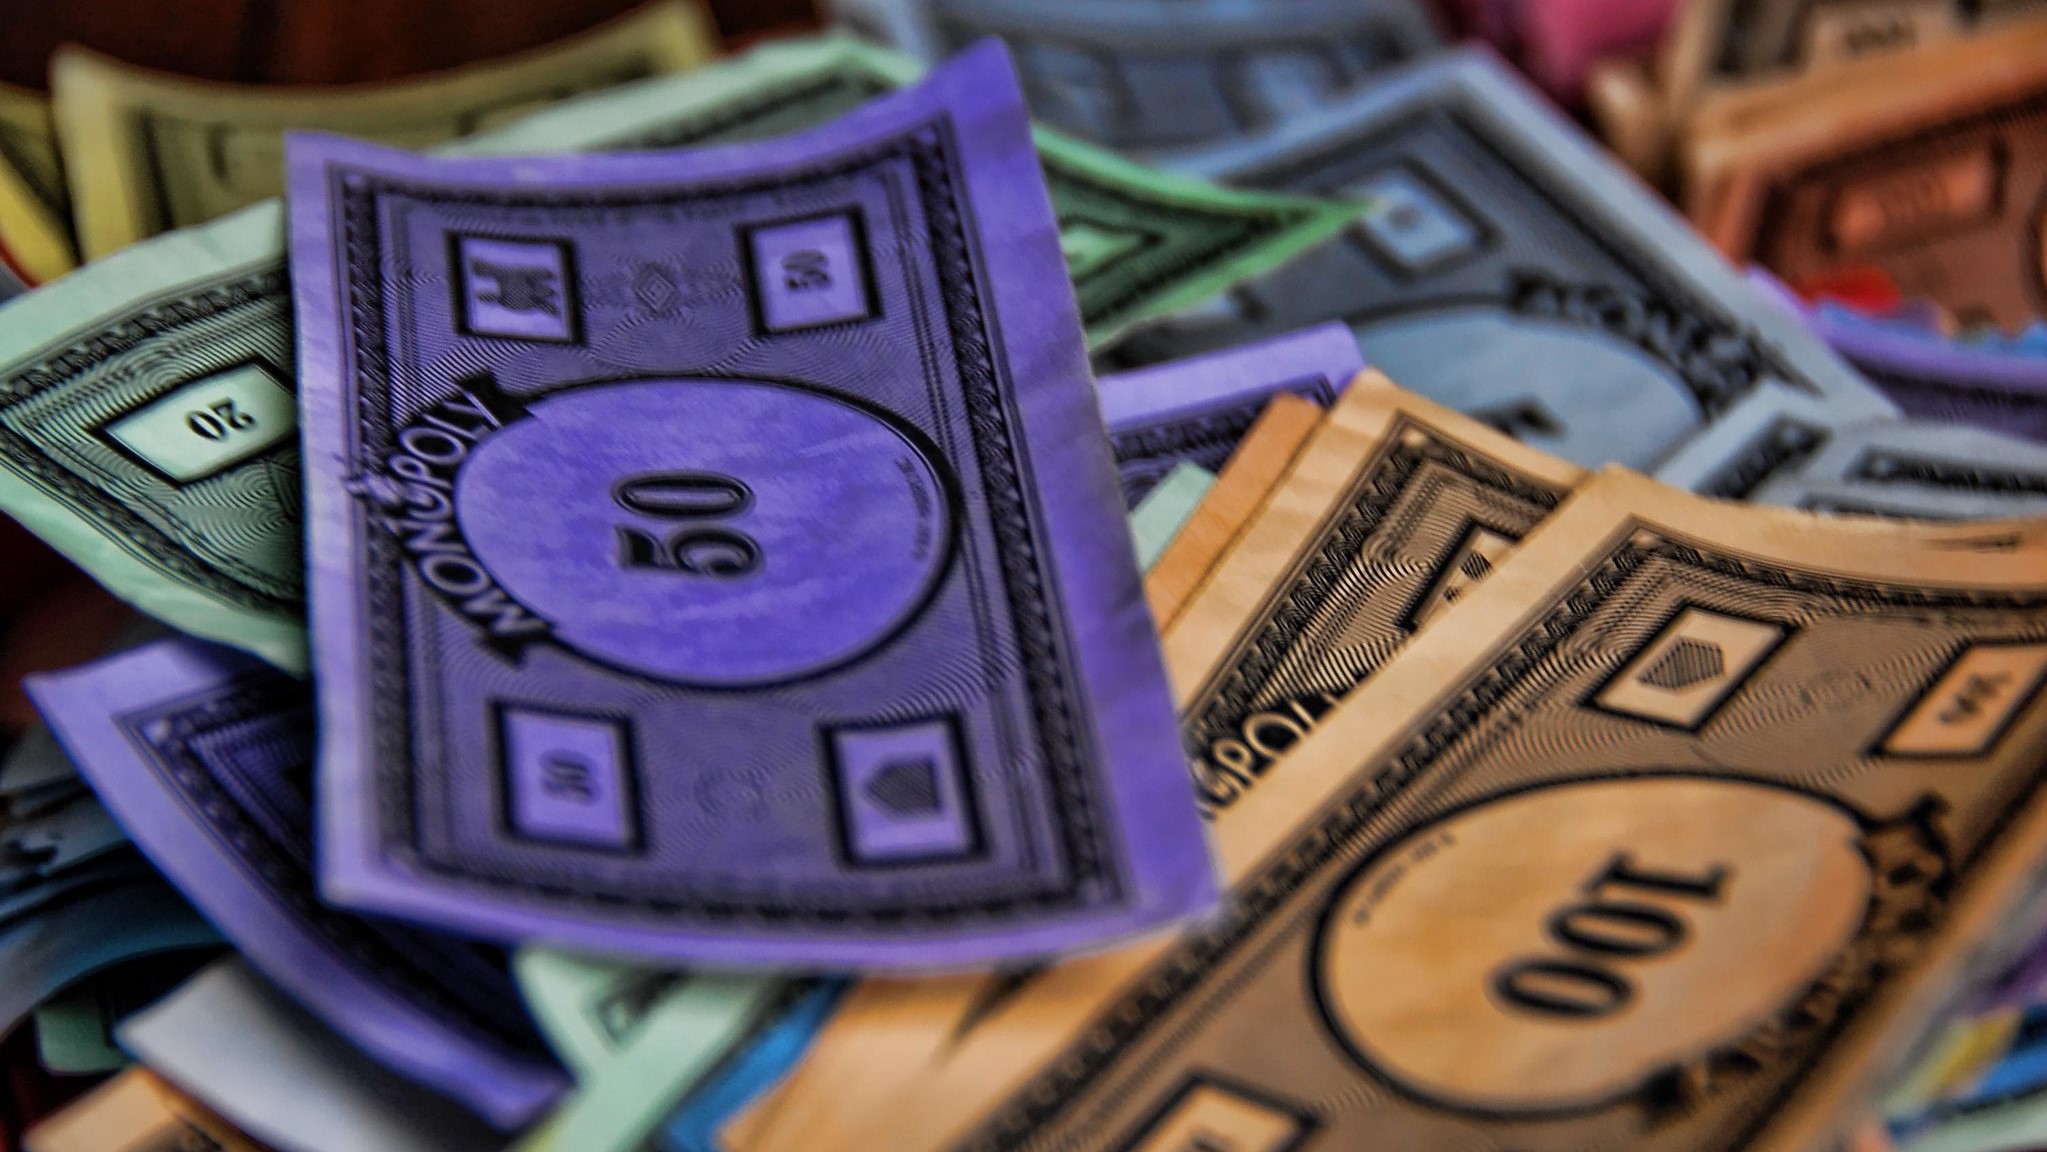 Play money from the board game Monopoly.